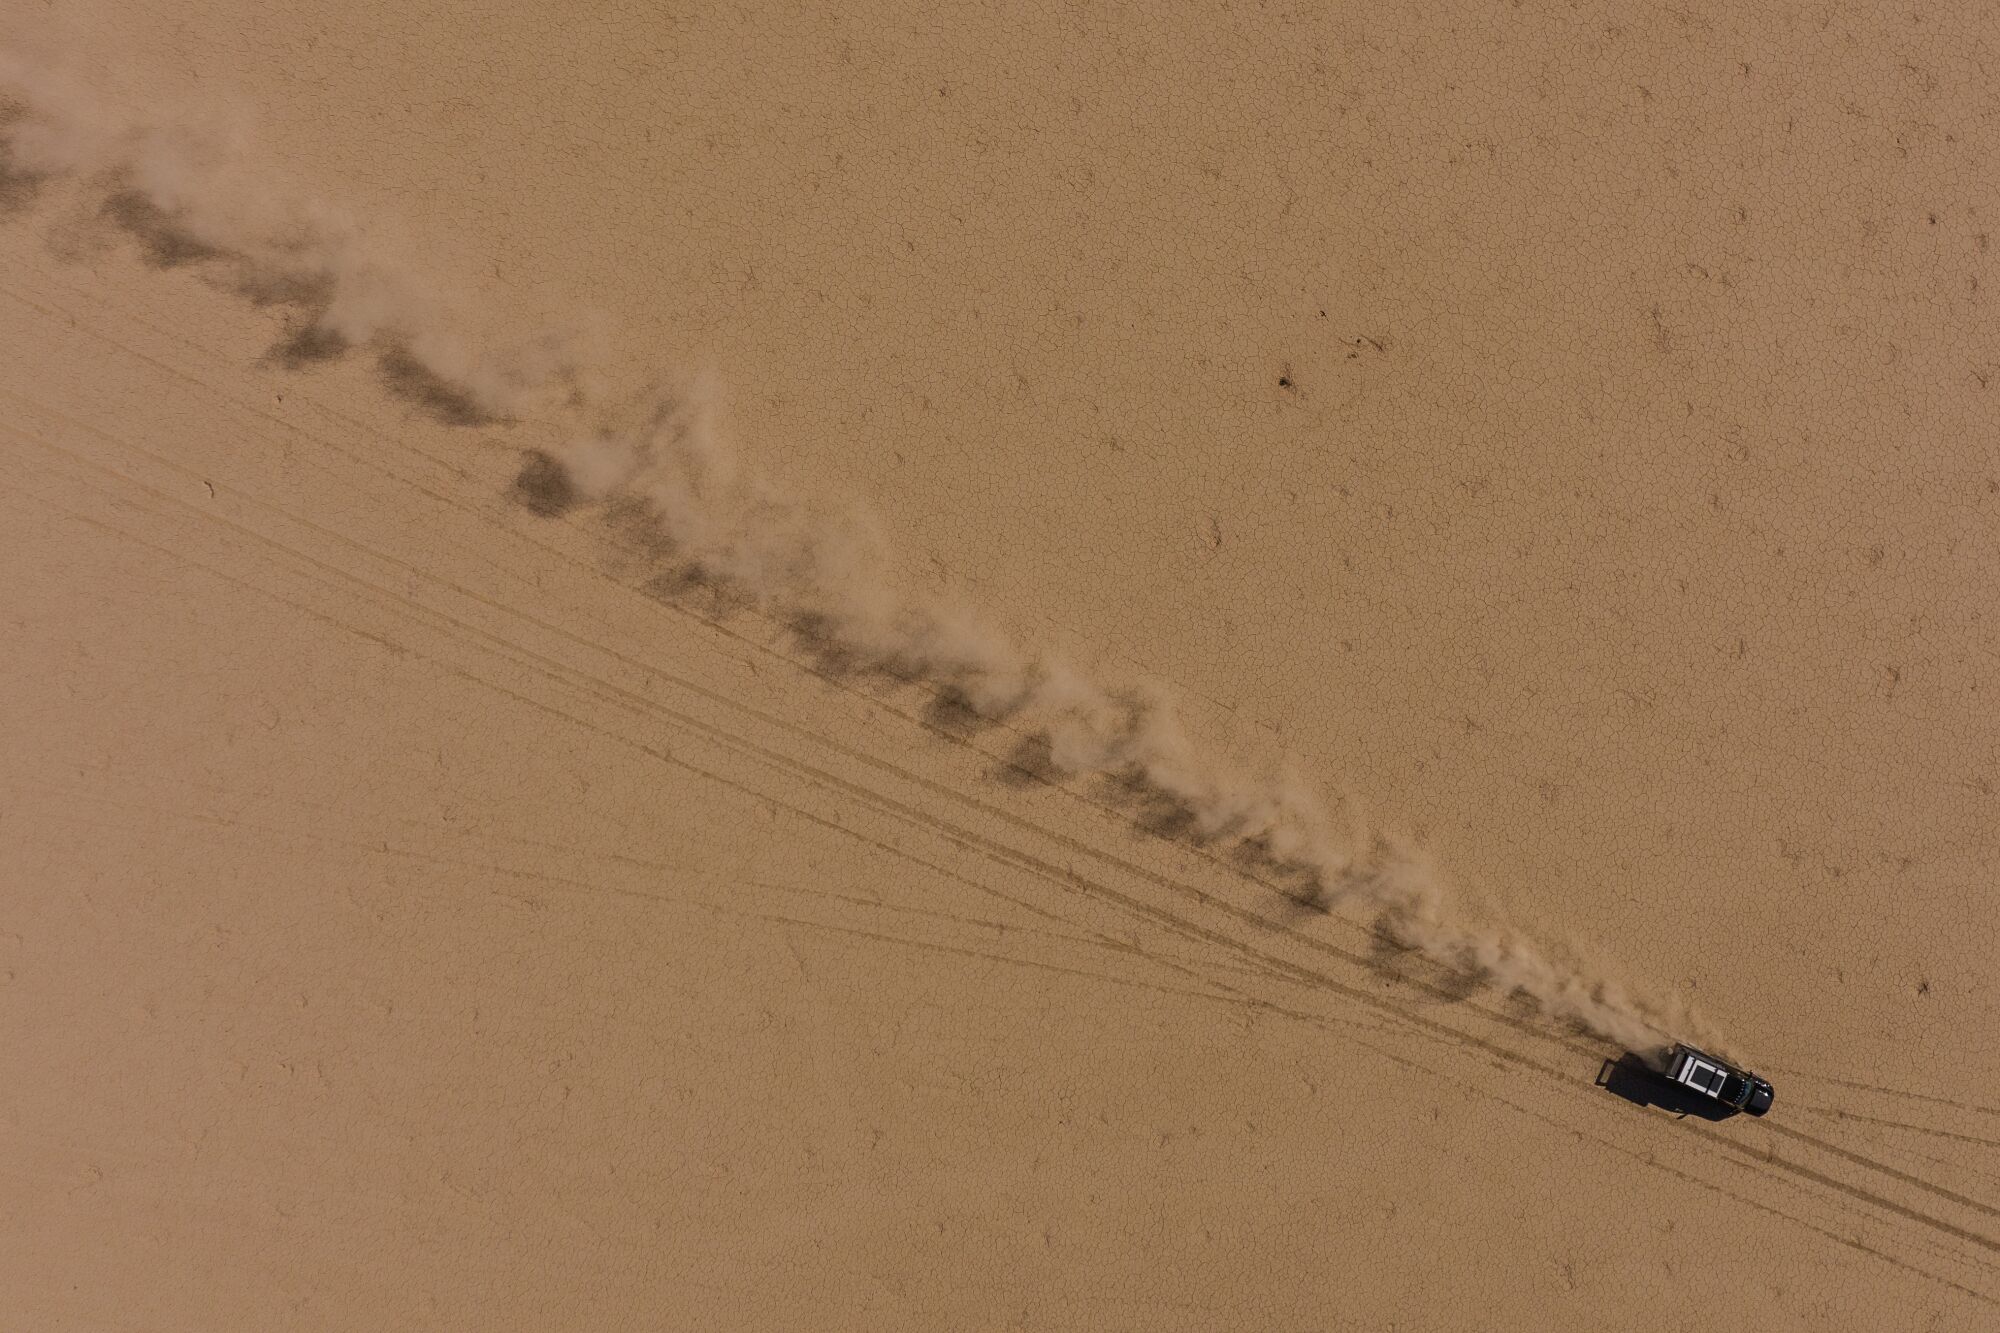 A drone photo of a truck driving across a dry lake bed, kicking up a stream of dust in its wake.